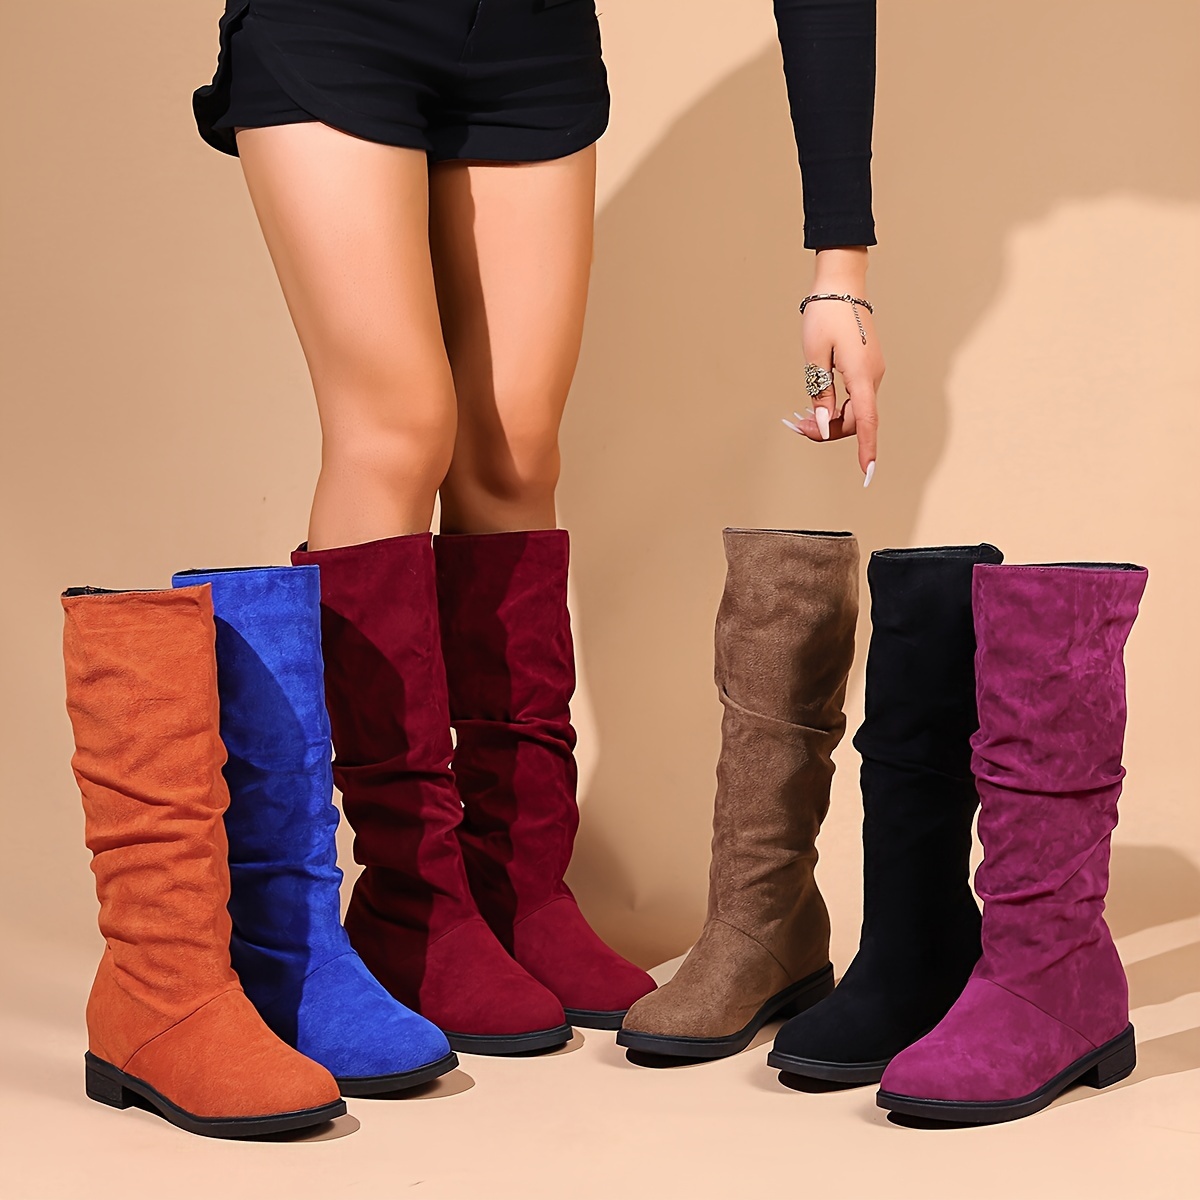 

Women's Slouchy Mid Calf Boots, Comfortable Round Toe Pull On Shoes, Classic Micro Suede Boots For Koningsdag/king's Day